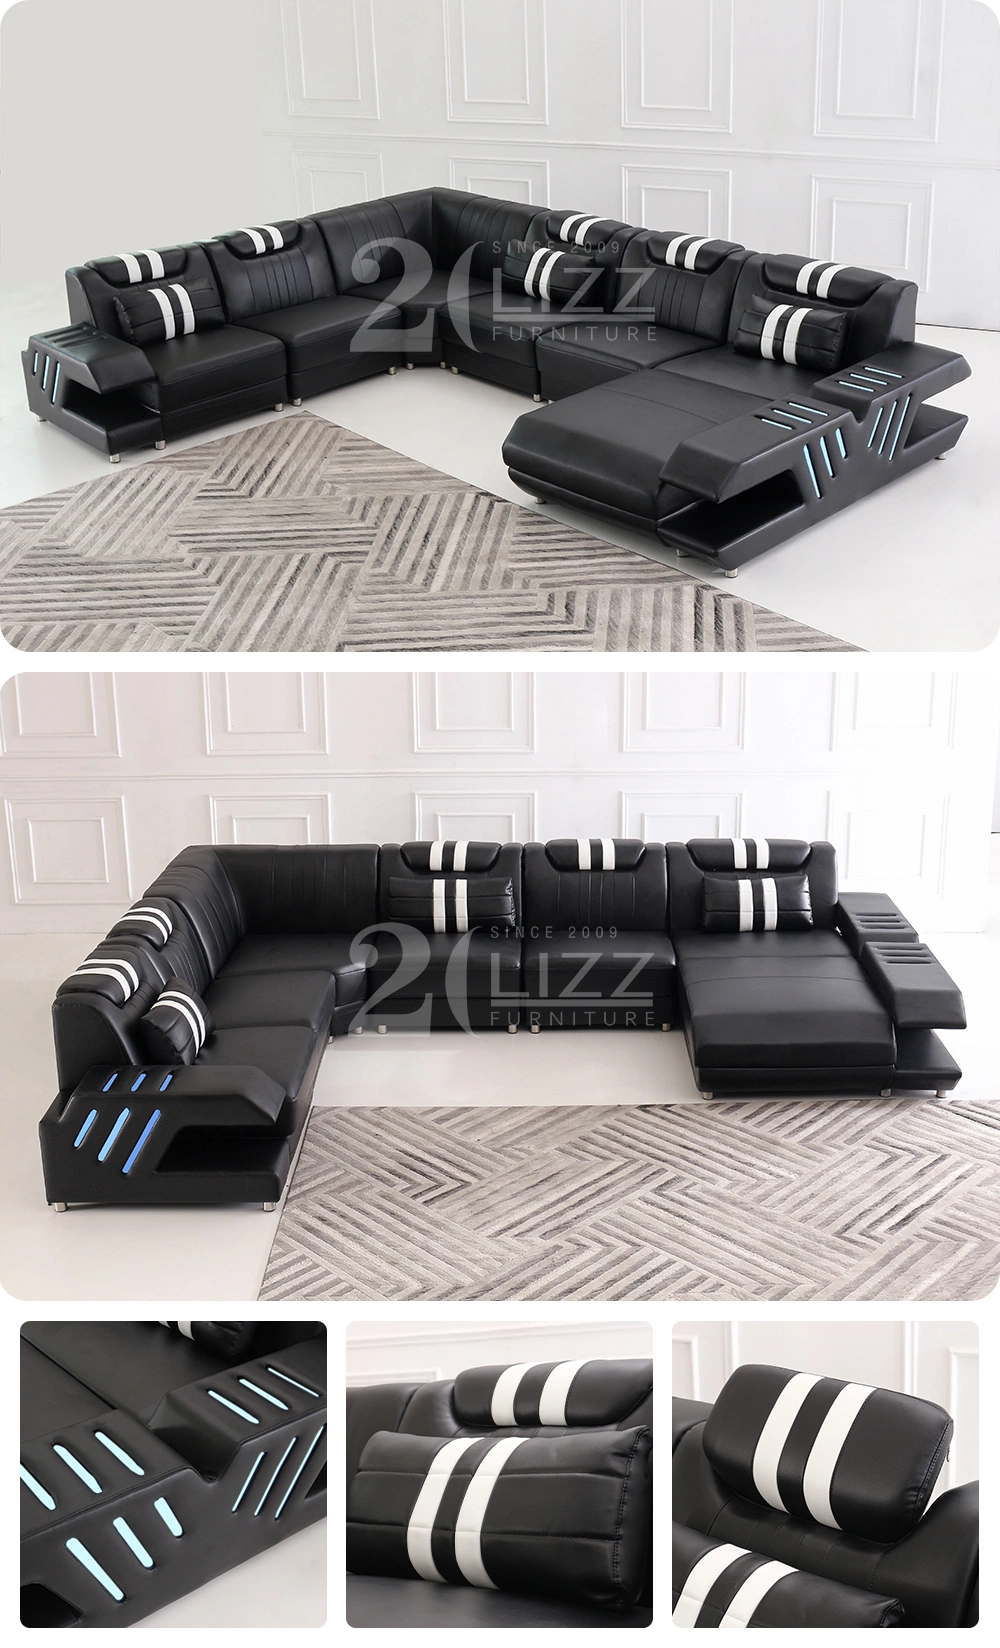 Direct Sell Modern Functional Genuine Leather Sofa Set Sectional U Shape LED Furniture with TV Stand Table